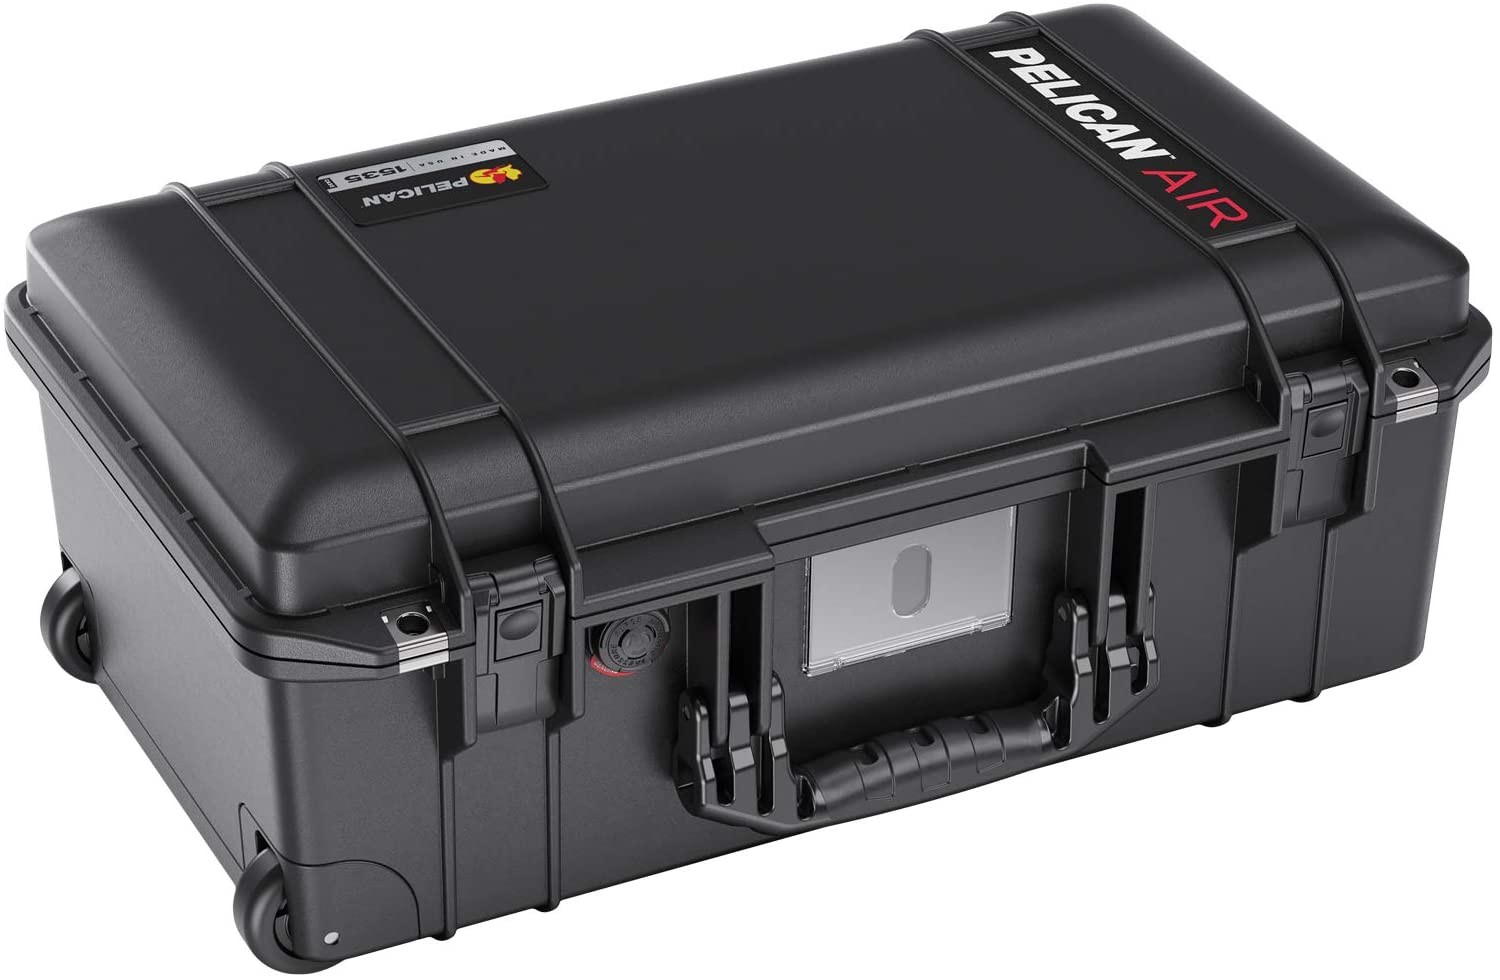 Pelican Air 1535 Case With Foam 2020 Edition With Push Button Latches Black 015350-0002-110